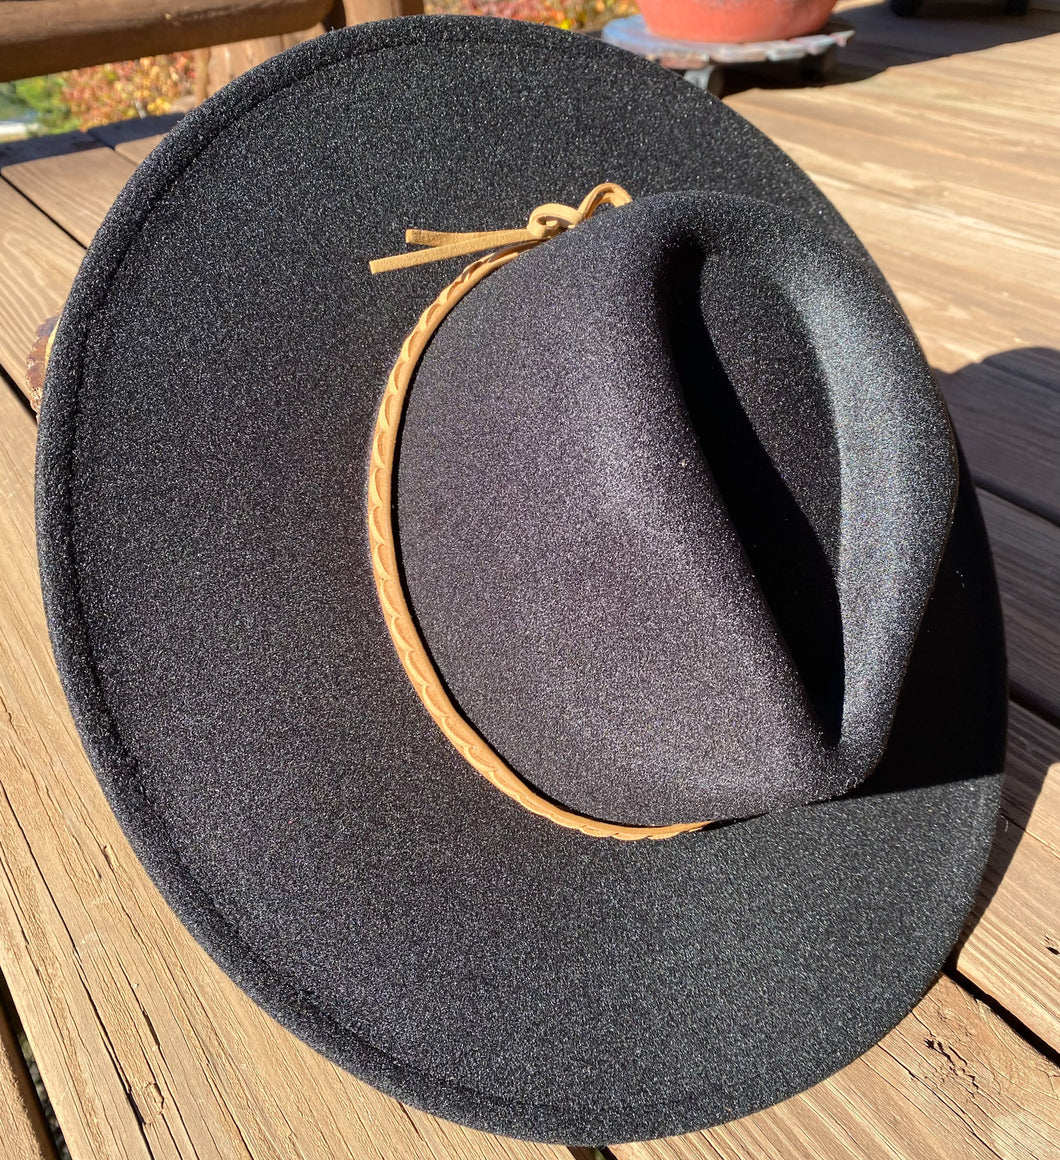 Dandy Panama Hat with Braided Leather Belt